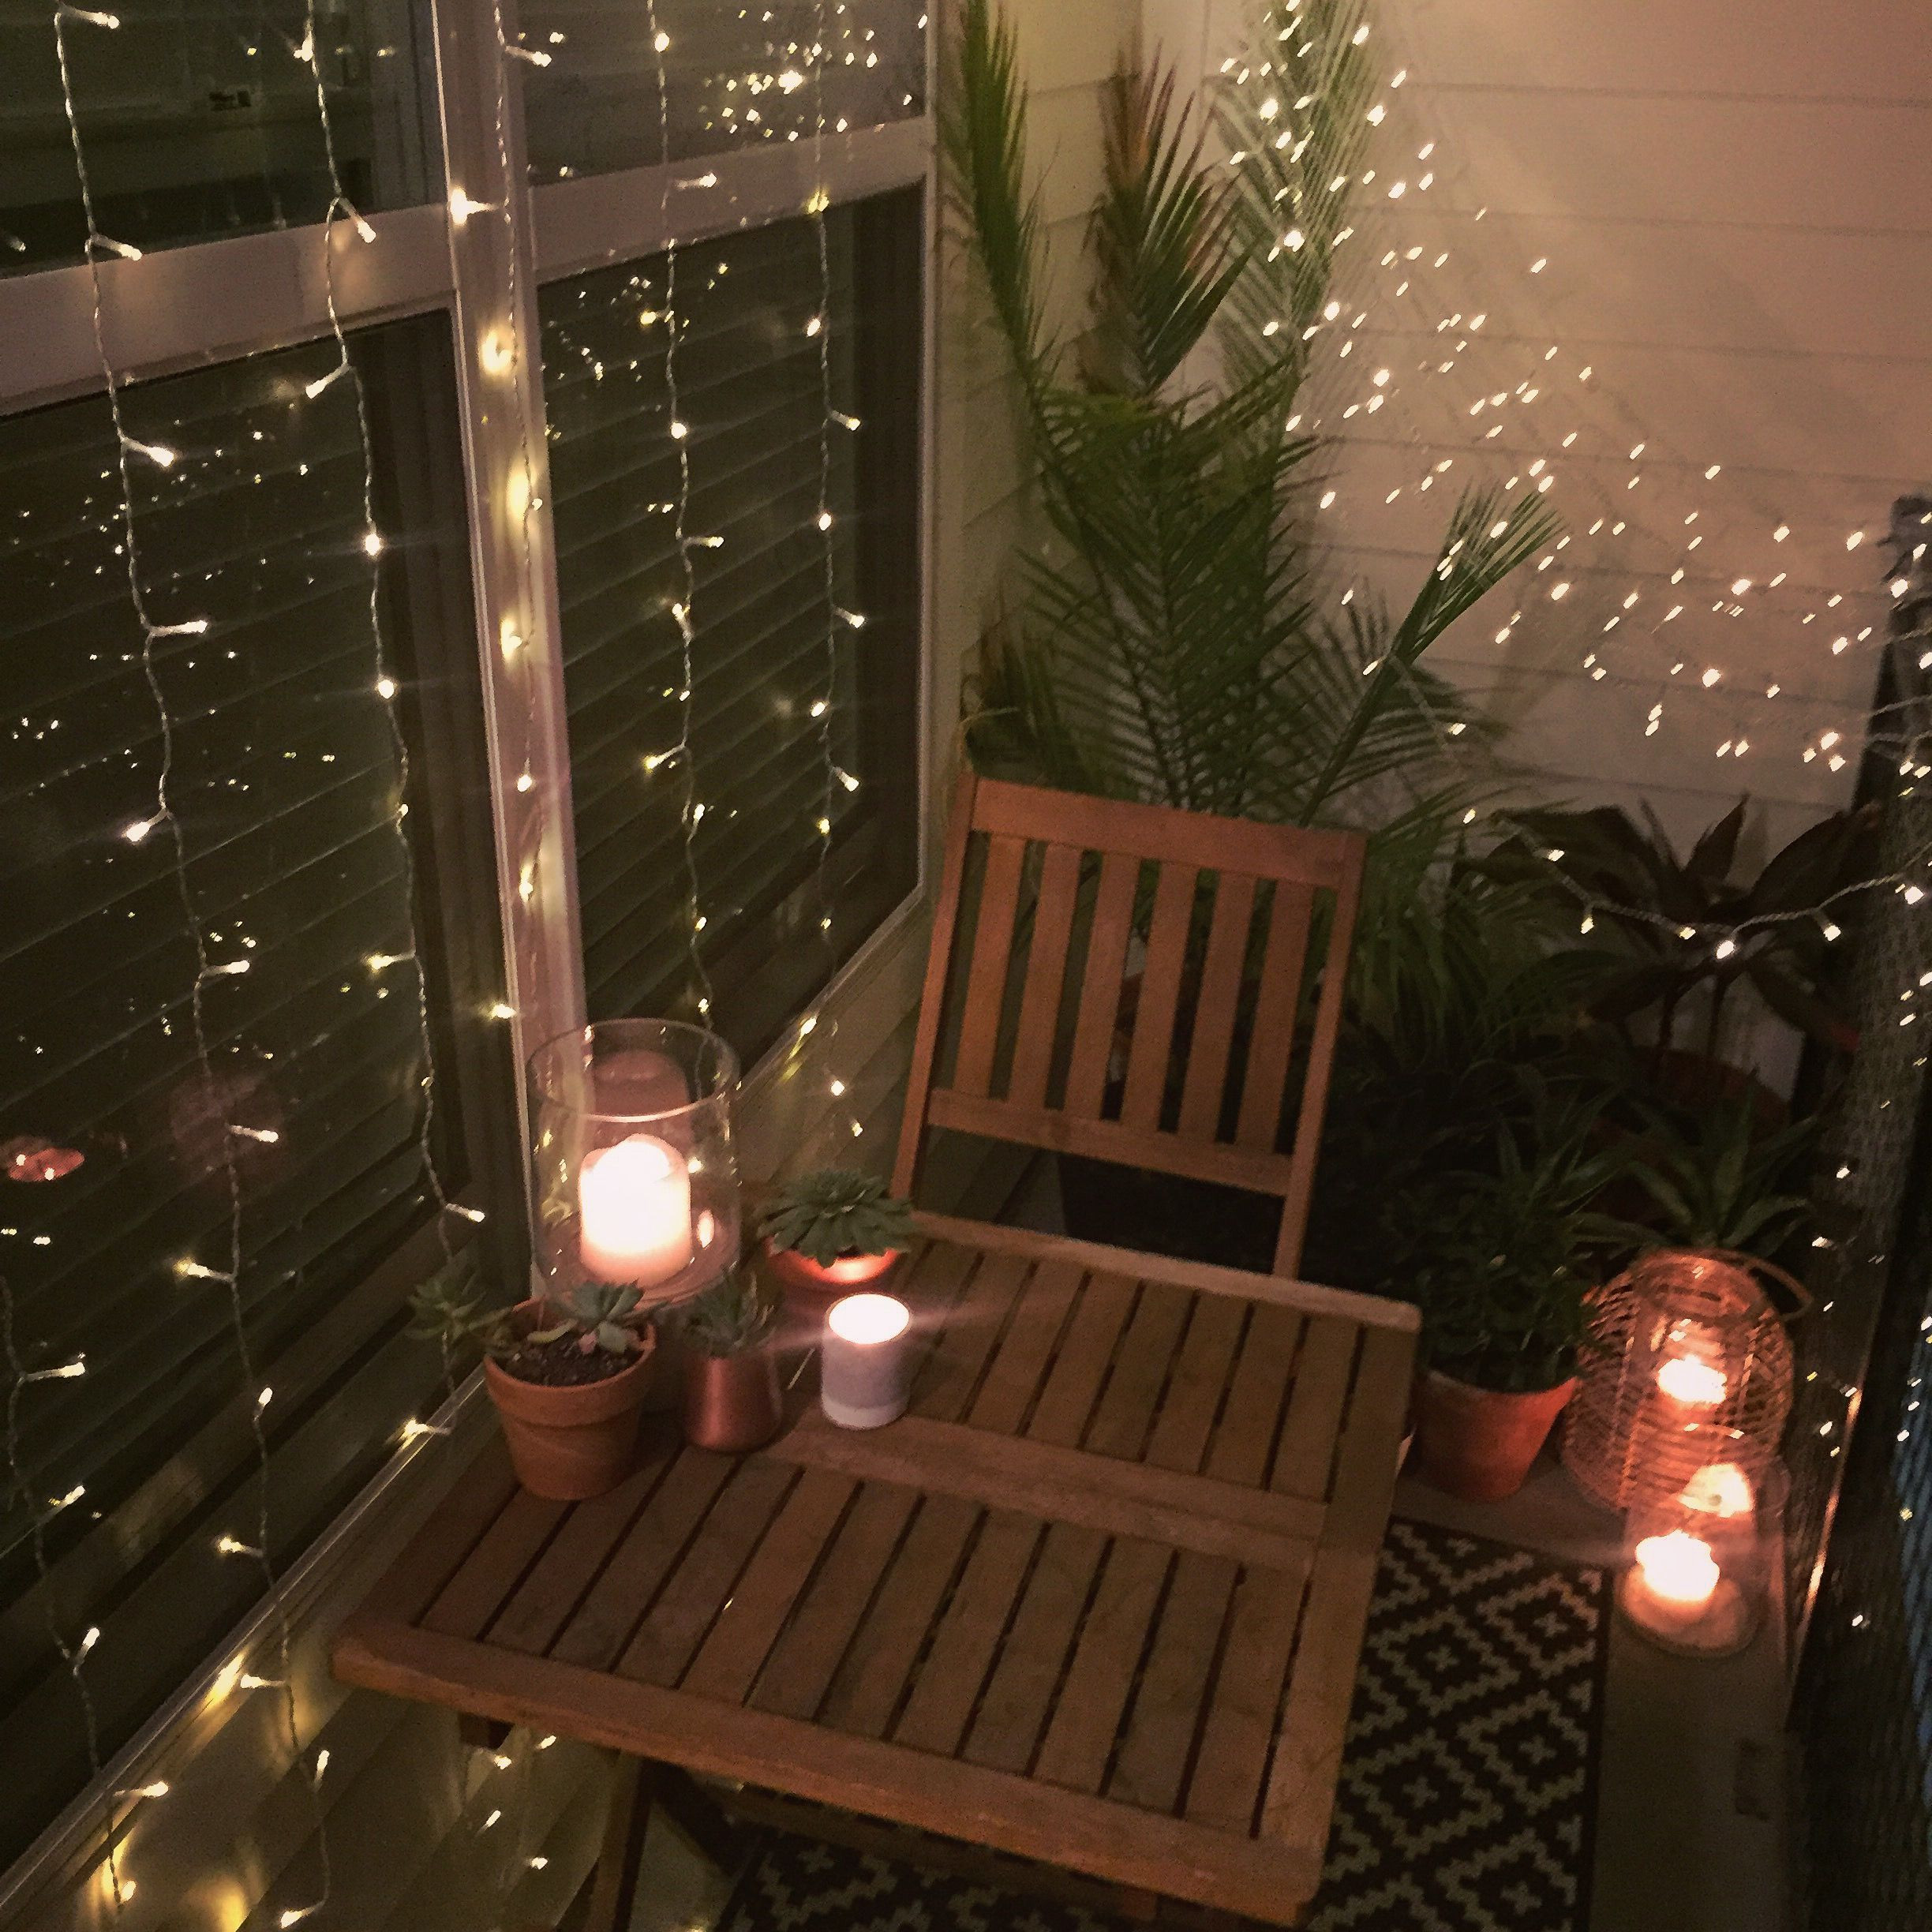 Apartment Patio Christmas Decorating Ideas
 Small balcony decor ideas for an apartment Hanging string